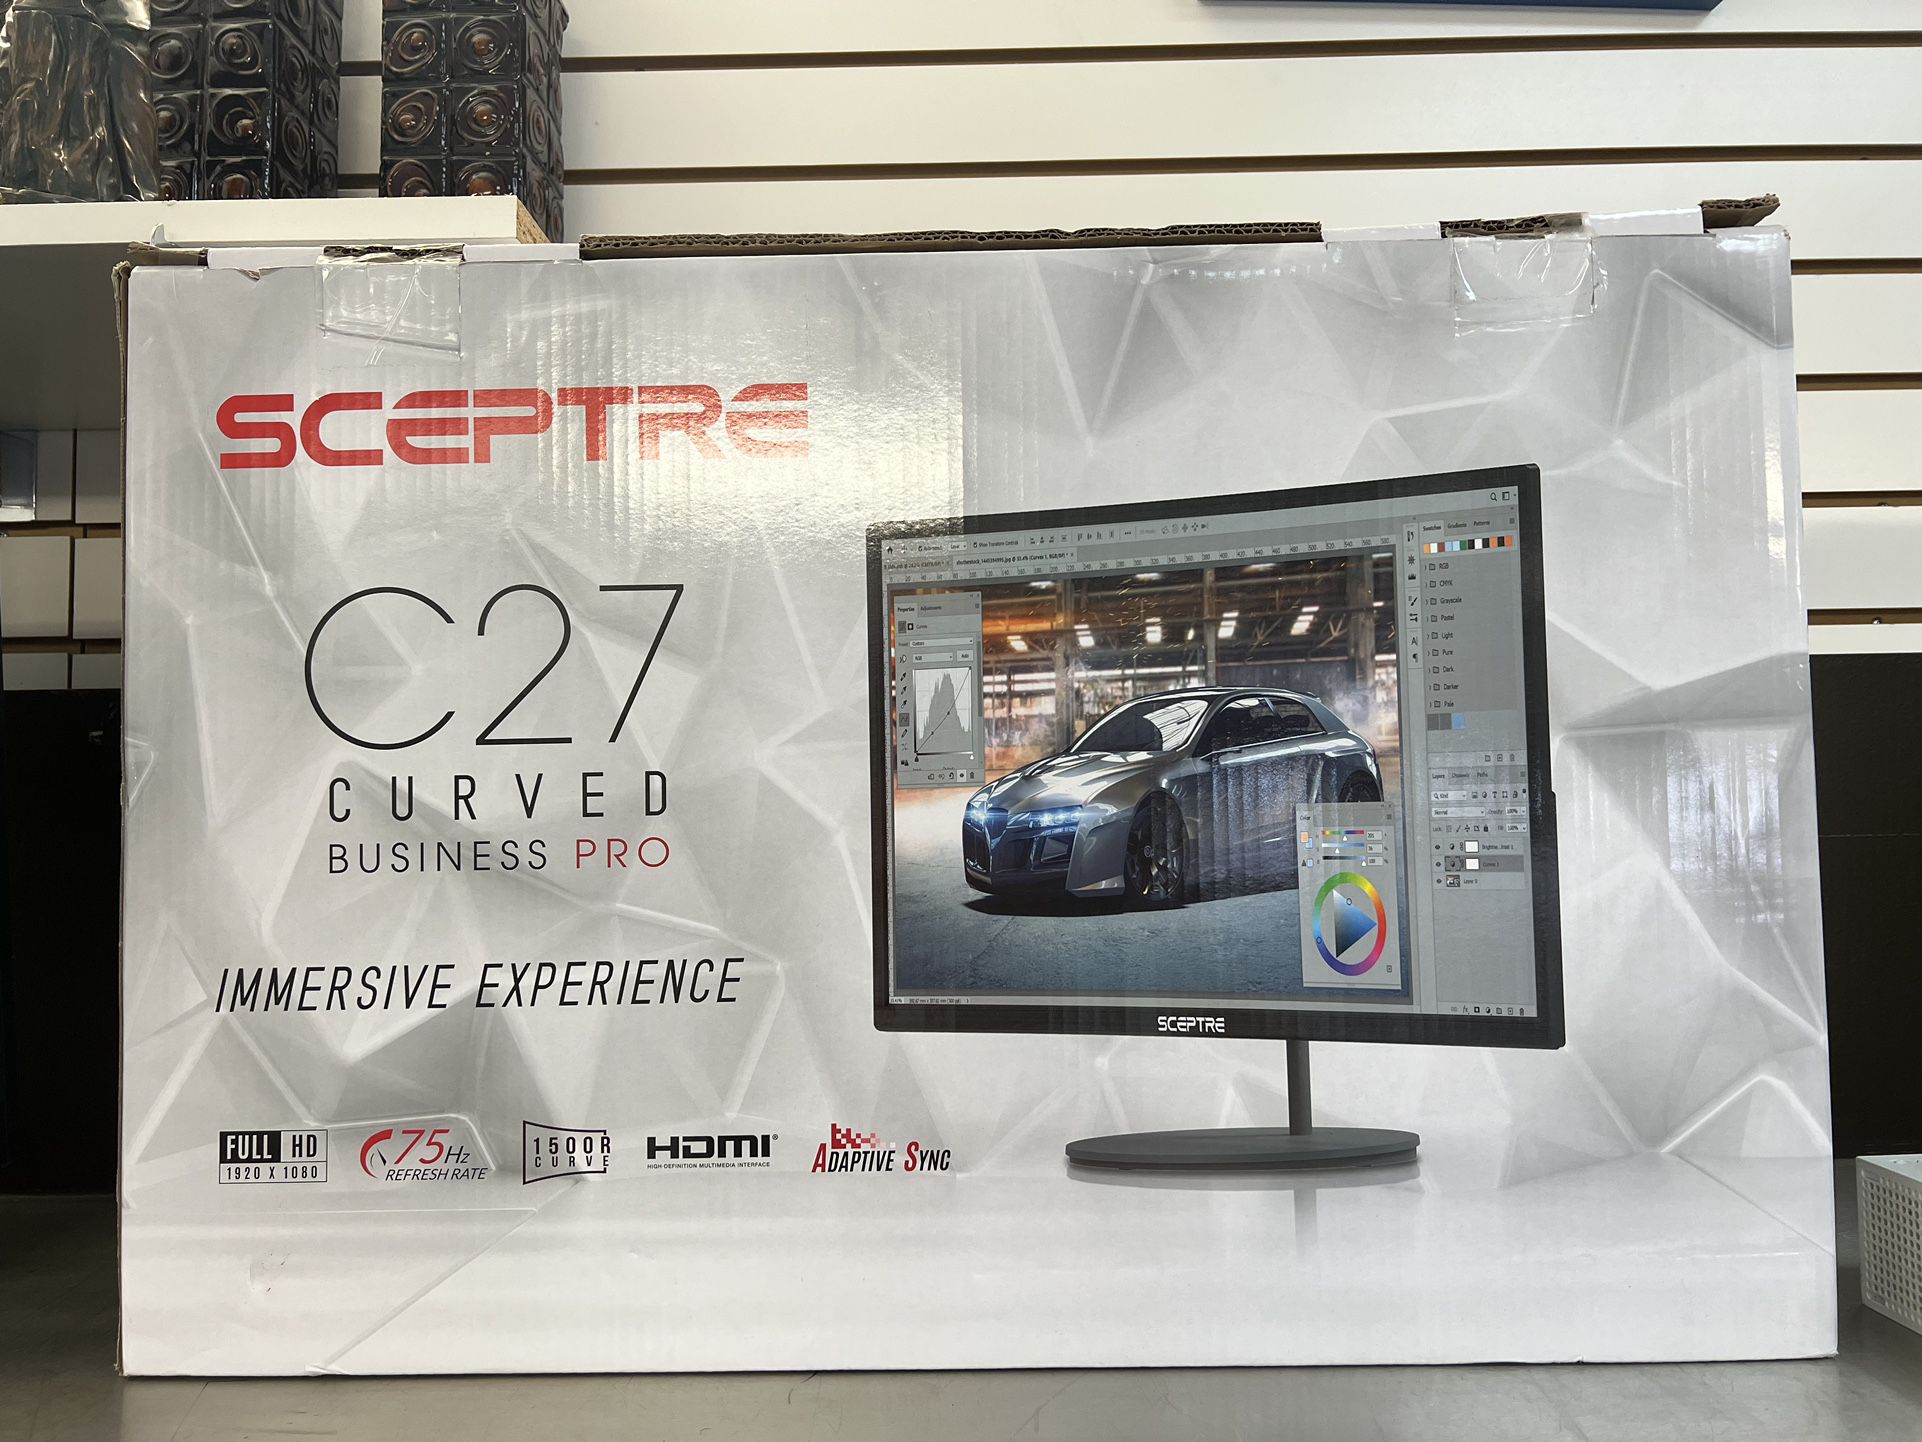 Sceptre C27 Curved Full HD 27” Gaming/Pro Computer Monitor 